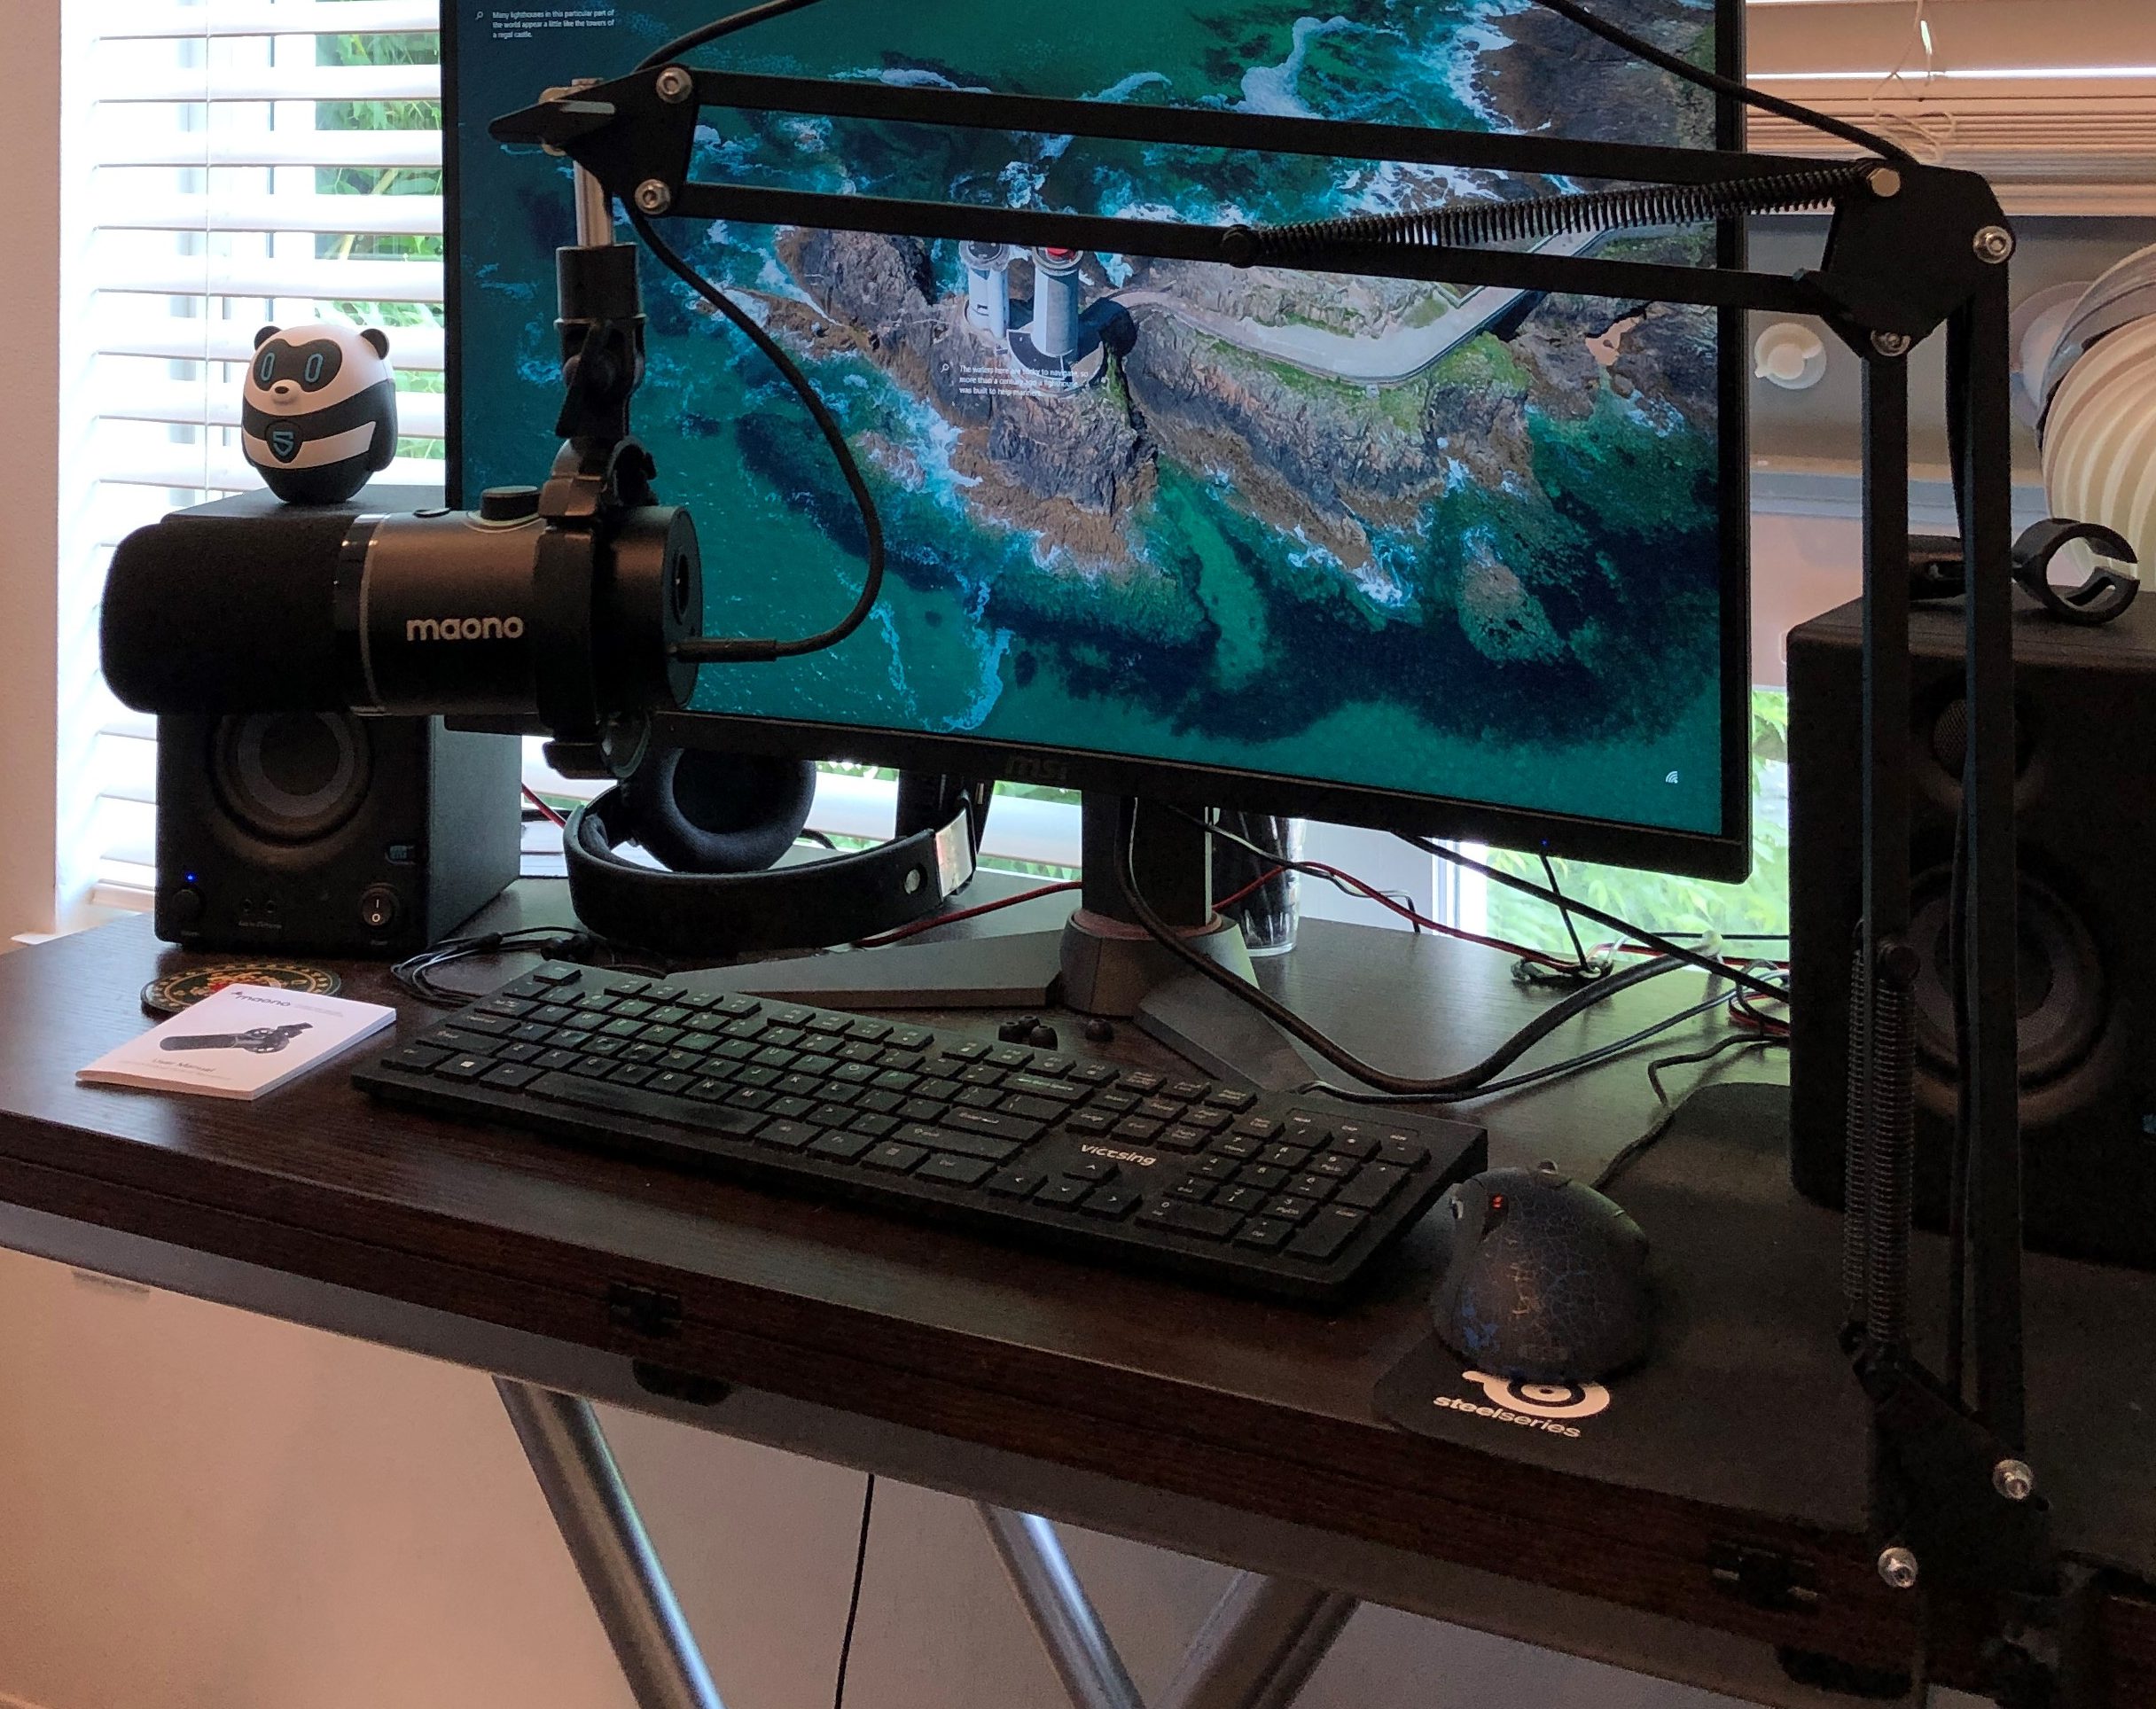 MAONO PD200X microphone and boom arm set up on desk